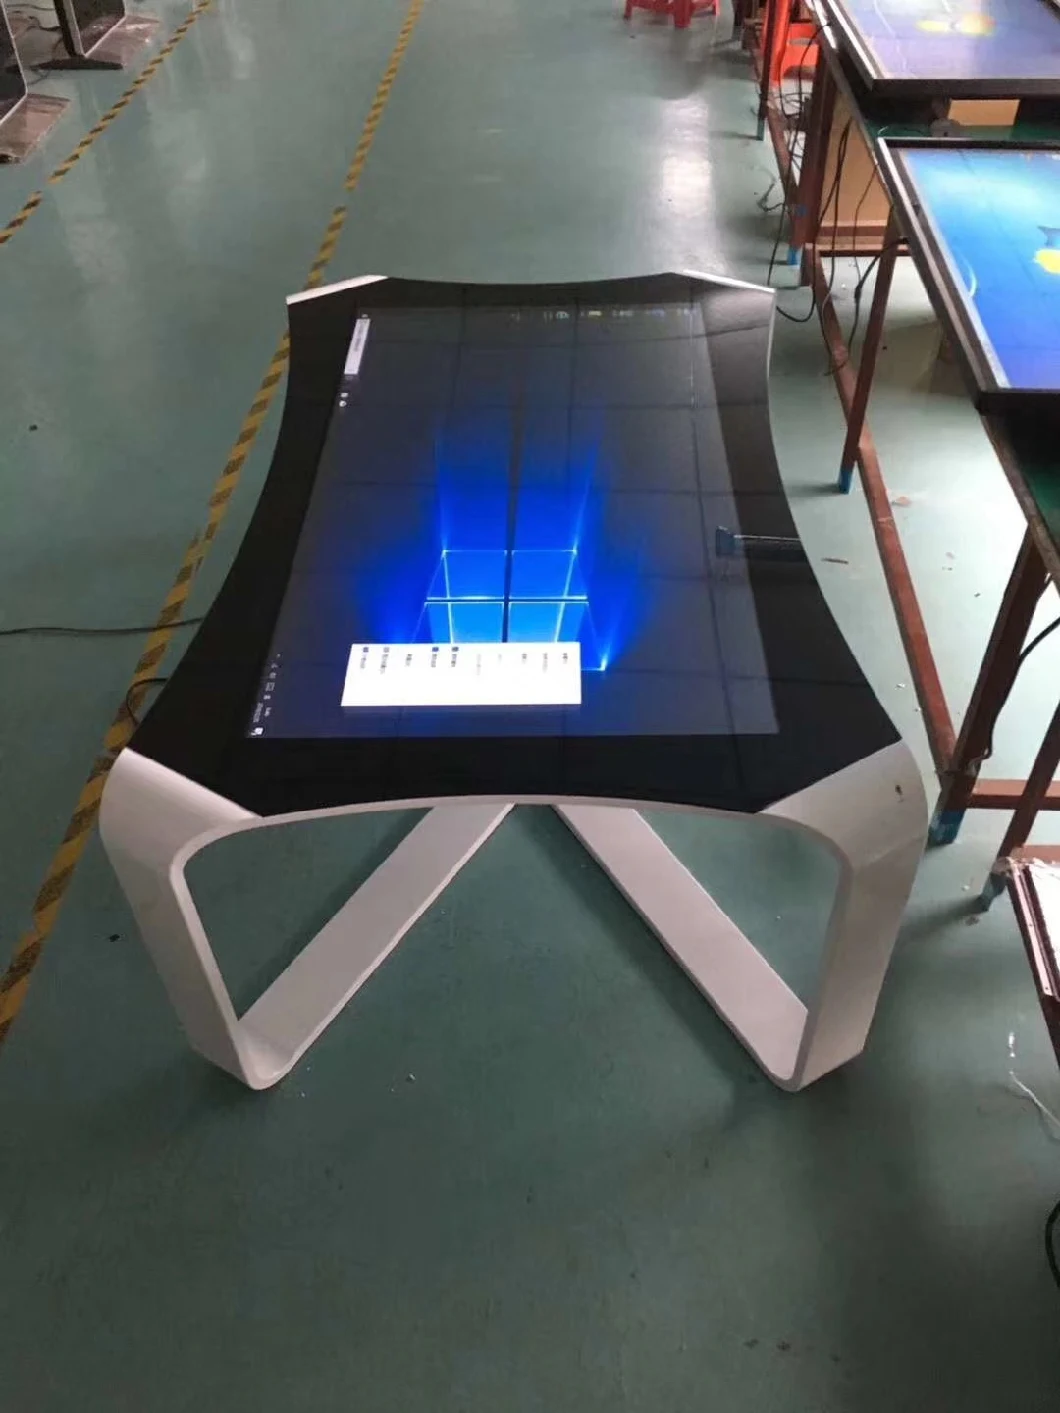 43'' 55'' Windows Interactive Smart Touch Table for Coffee / Restaurant